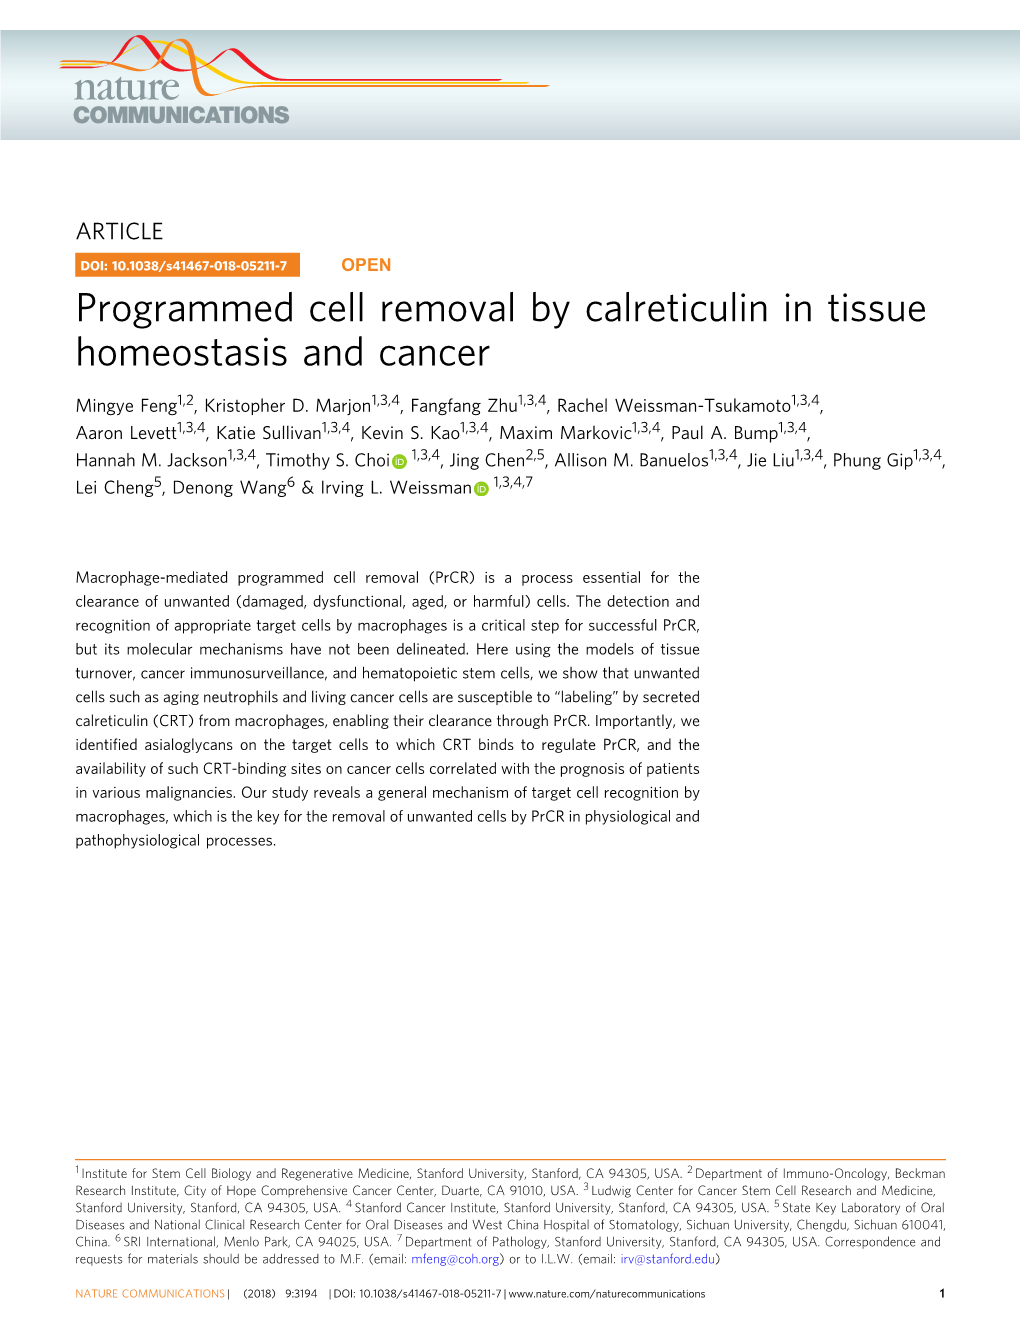 Programmed Cell Removal by Calreticulin in Tissue Homeostasis and Cancer